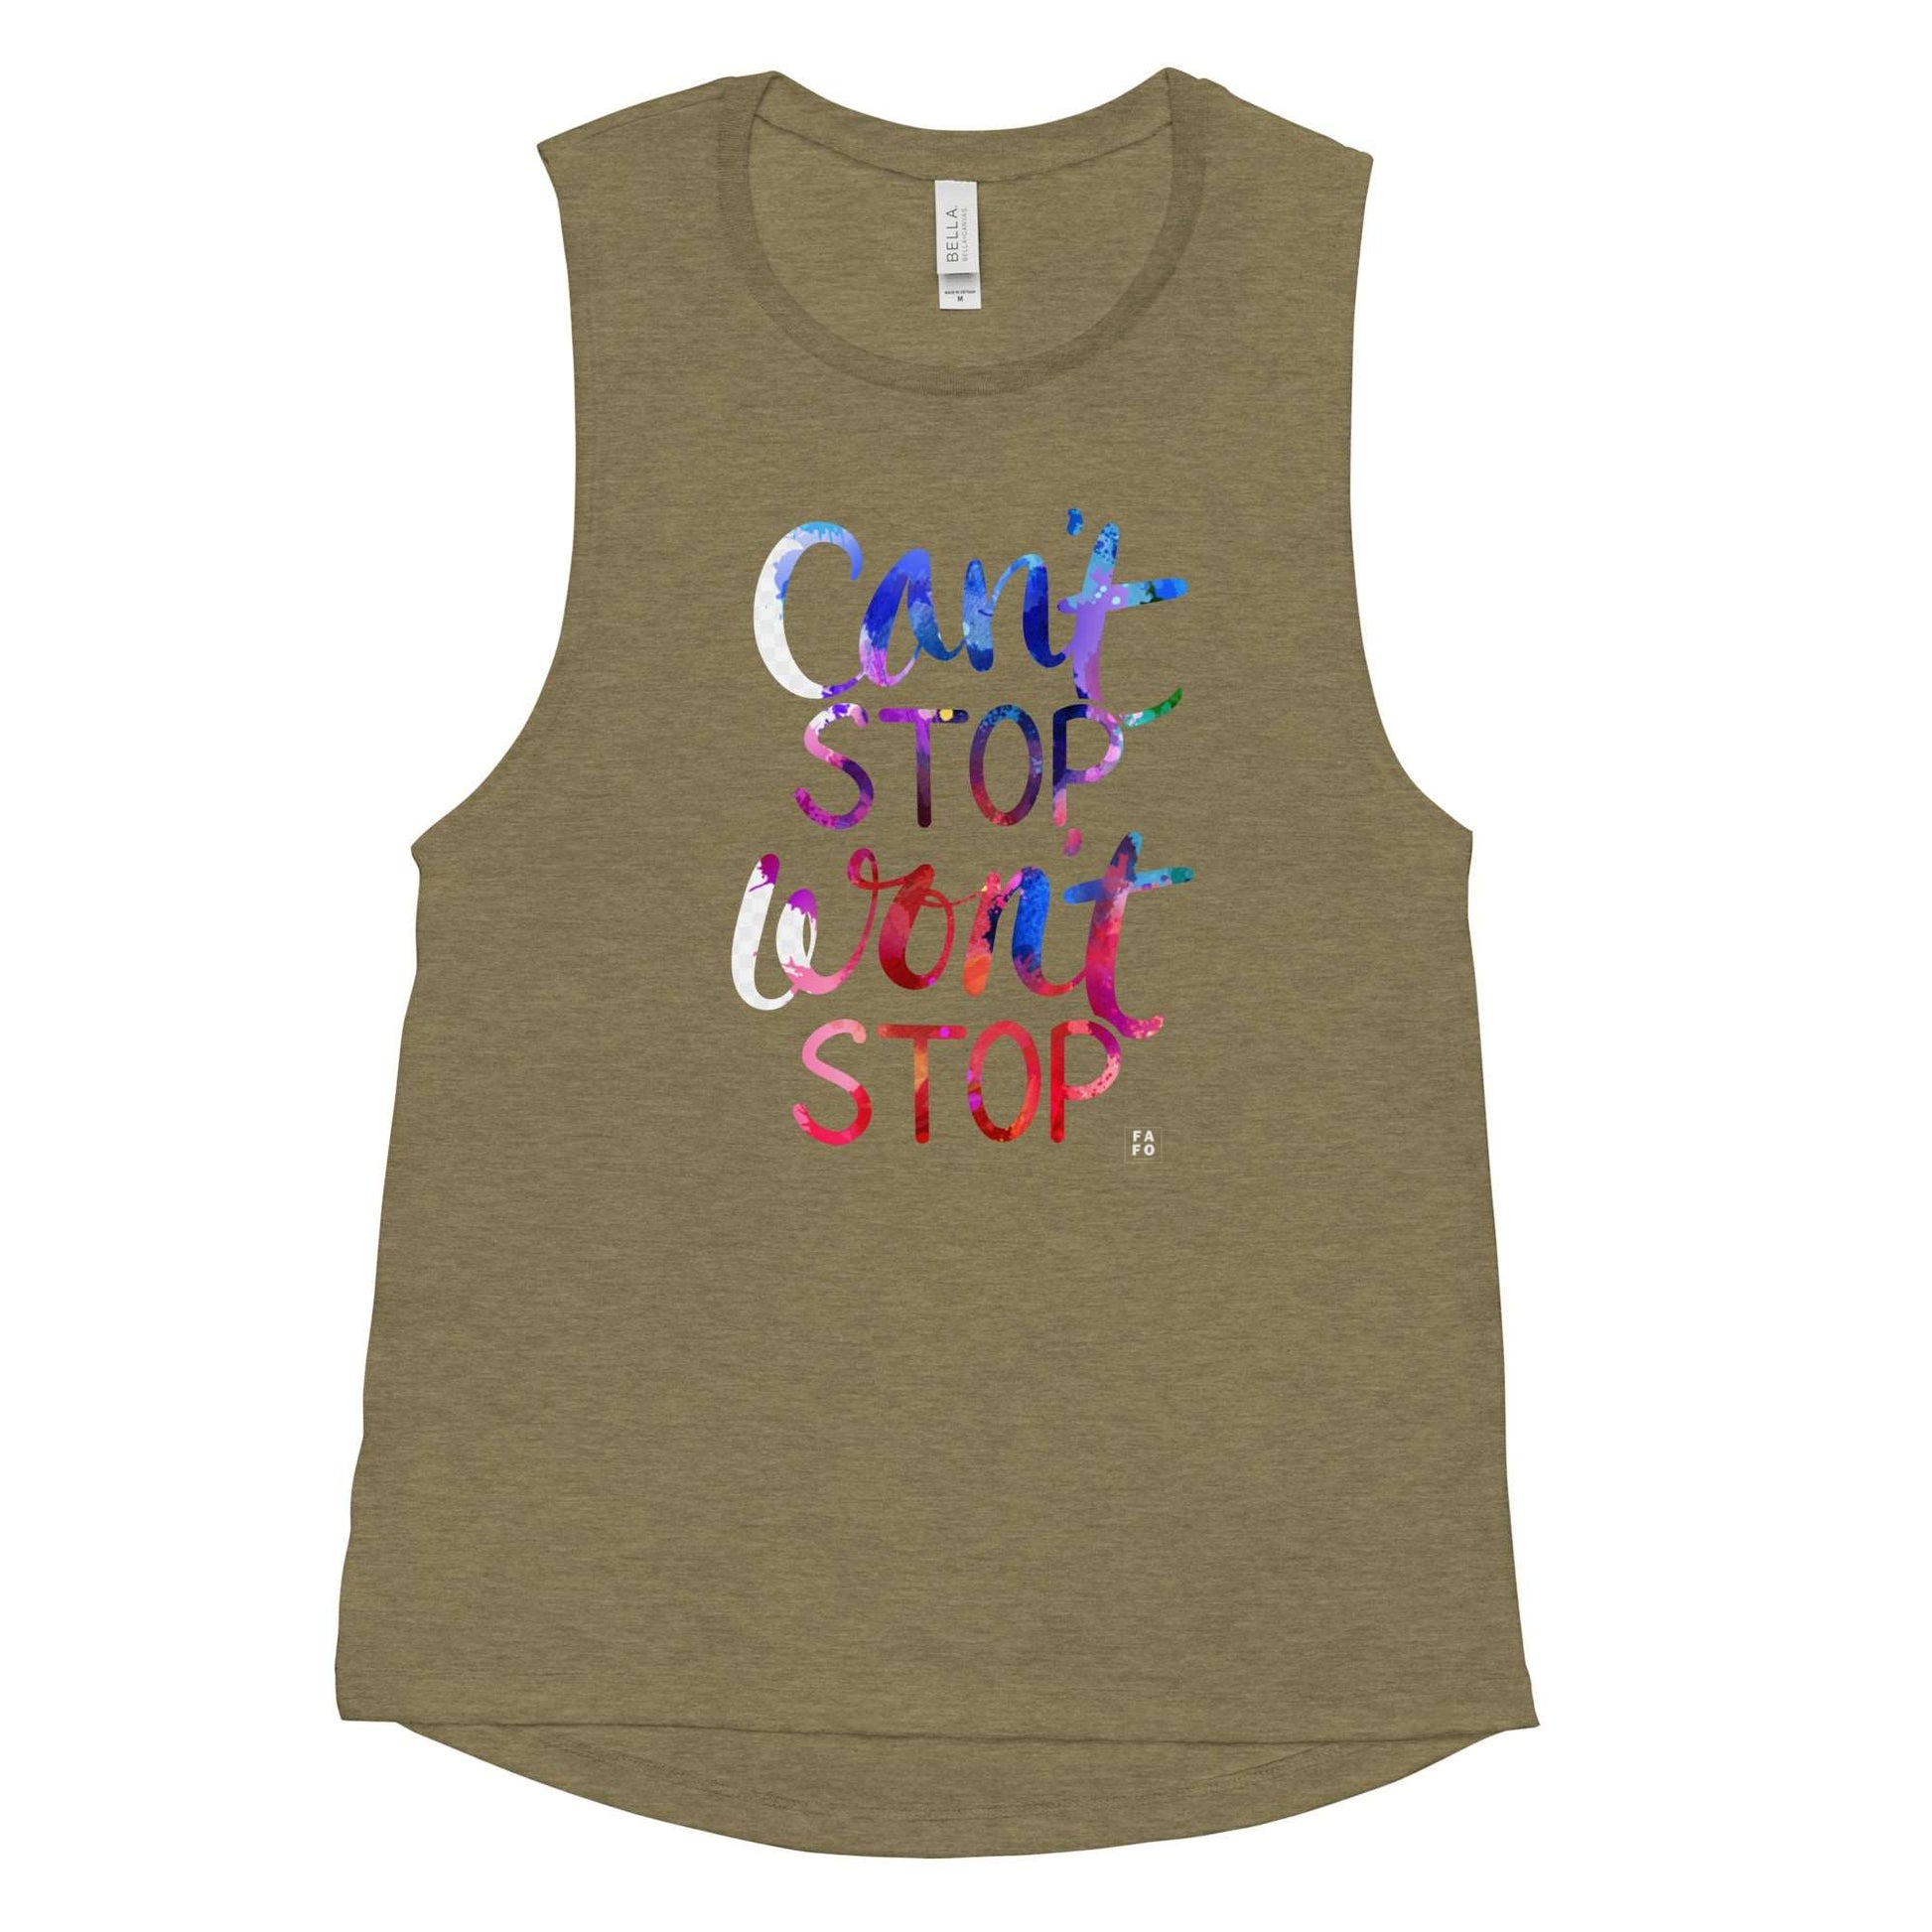 Bella Muscle Tank - Can't Stop Won't Stop